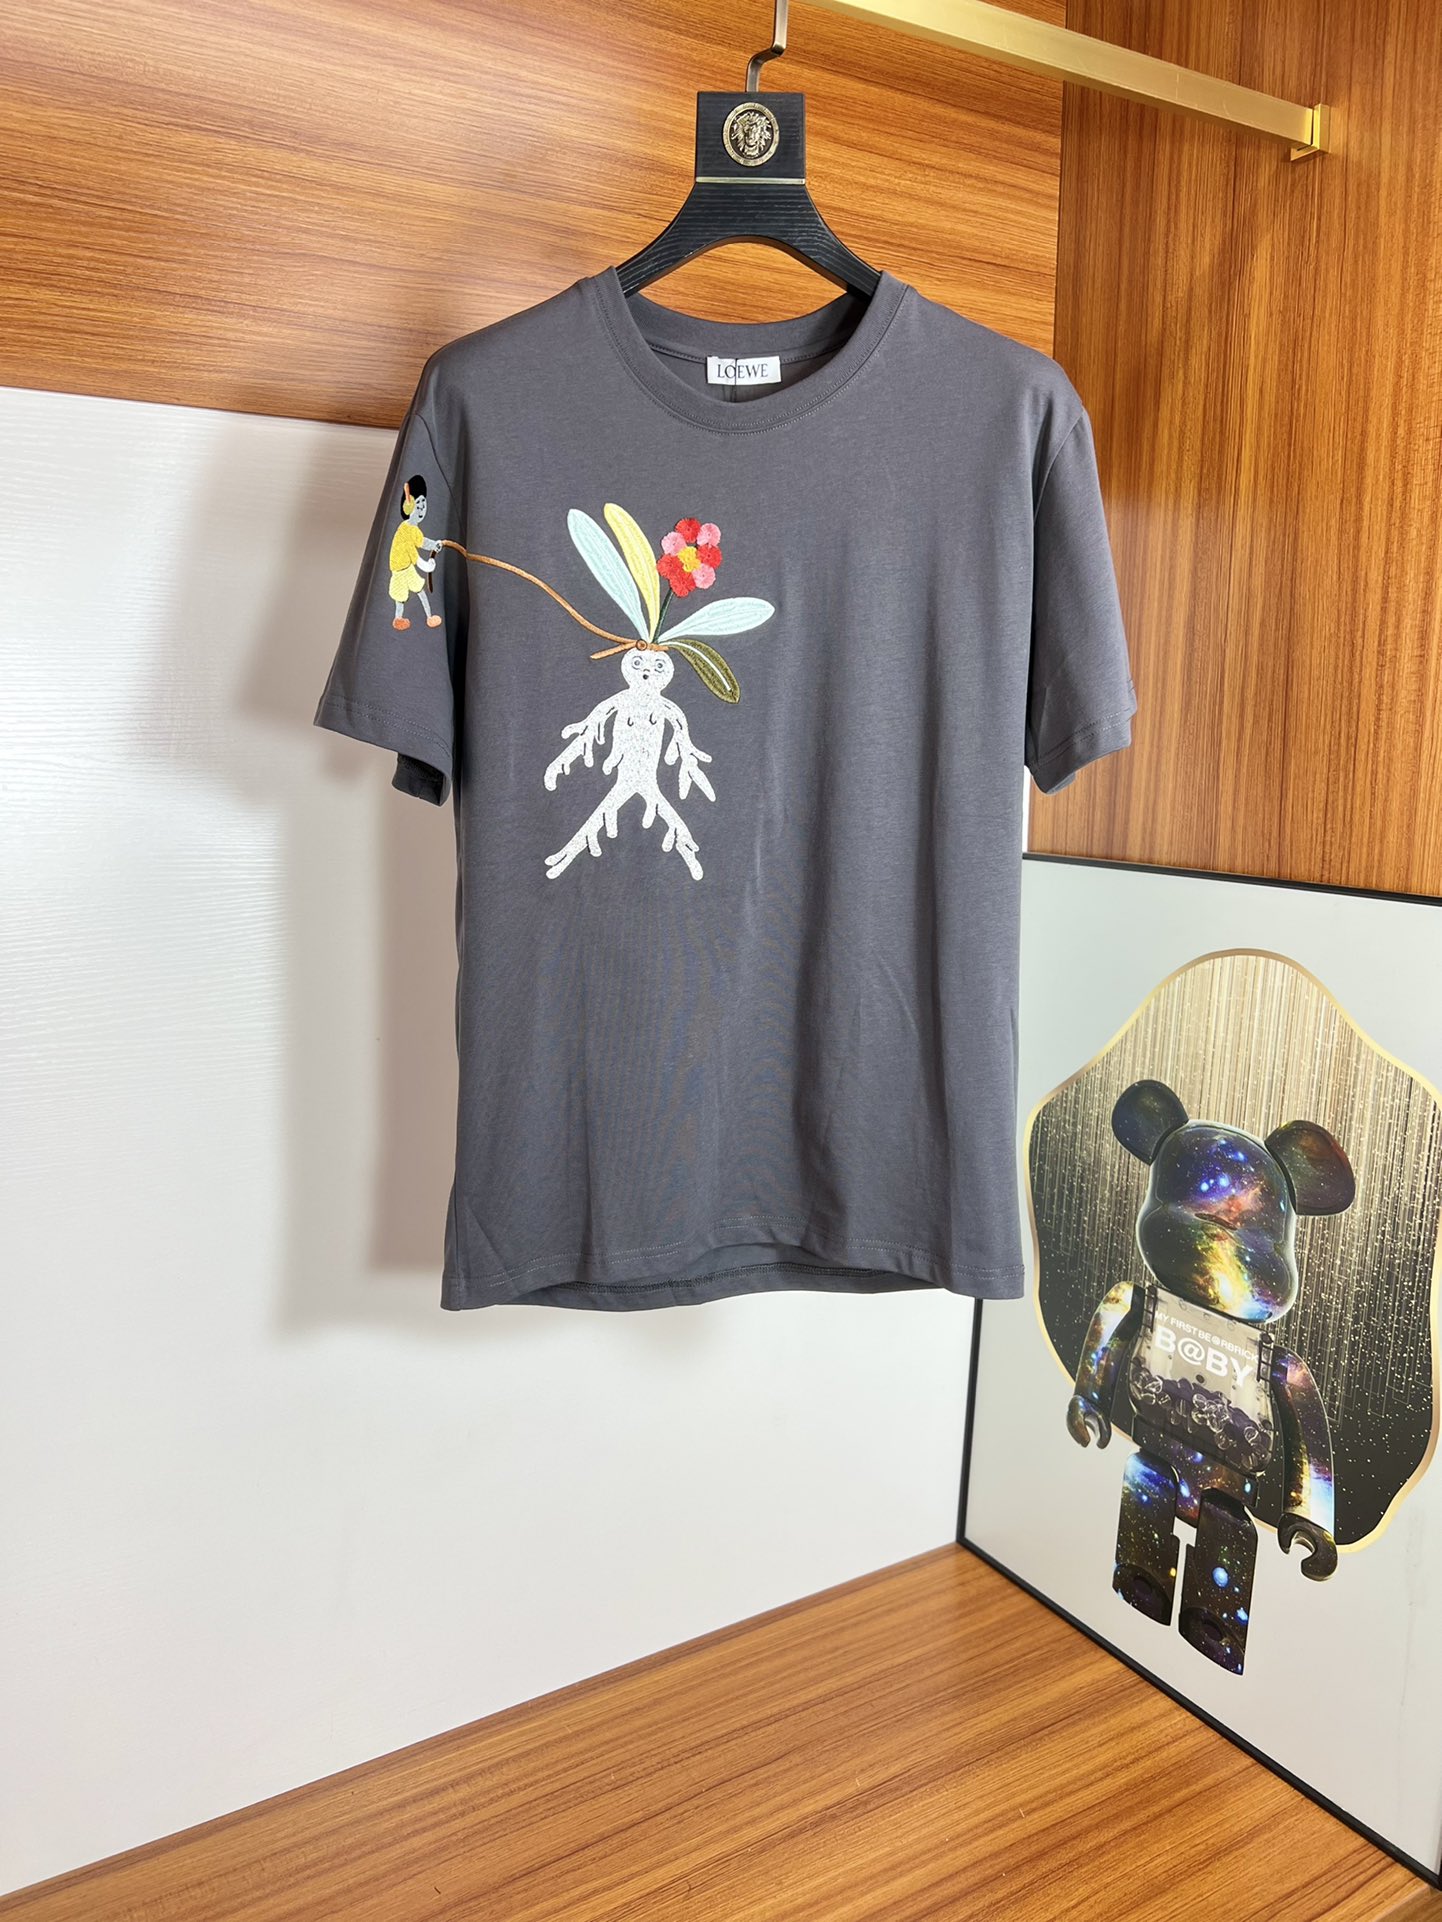 Loewe Copy
 Clothing T-Shirt Spring/Summer Collection Short Sleeve